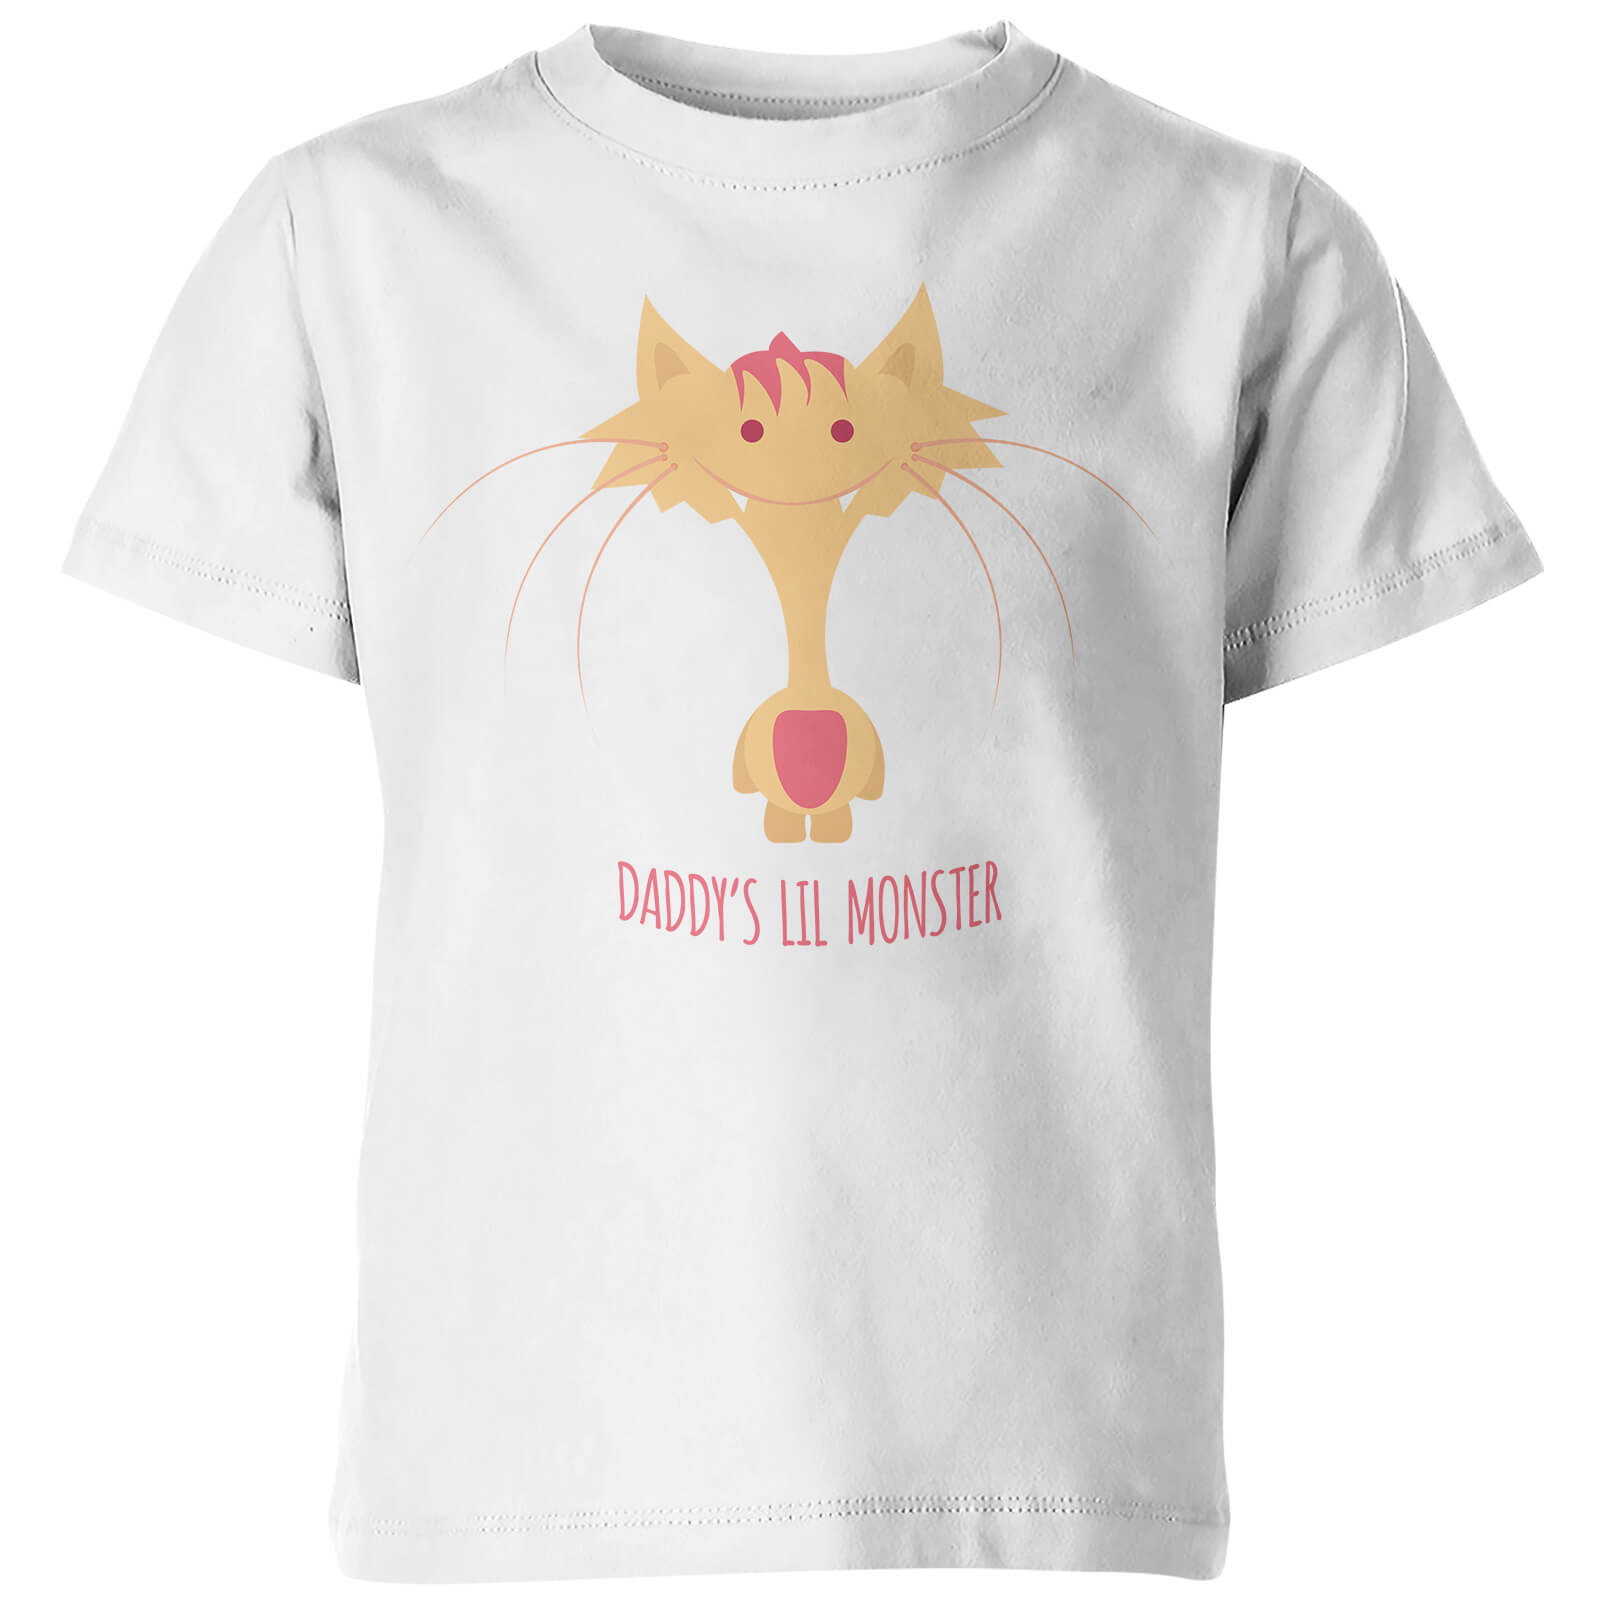 My Little Rascal Kids Daddys Lil Monster White T Shirt   11 12 Years   White